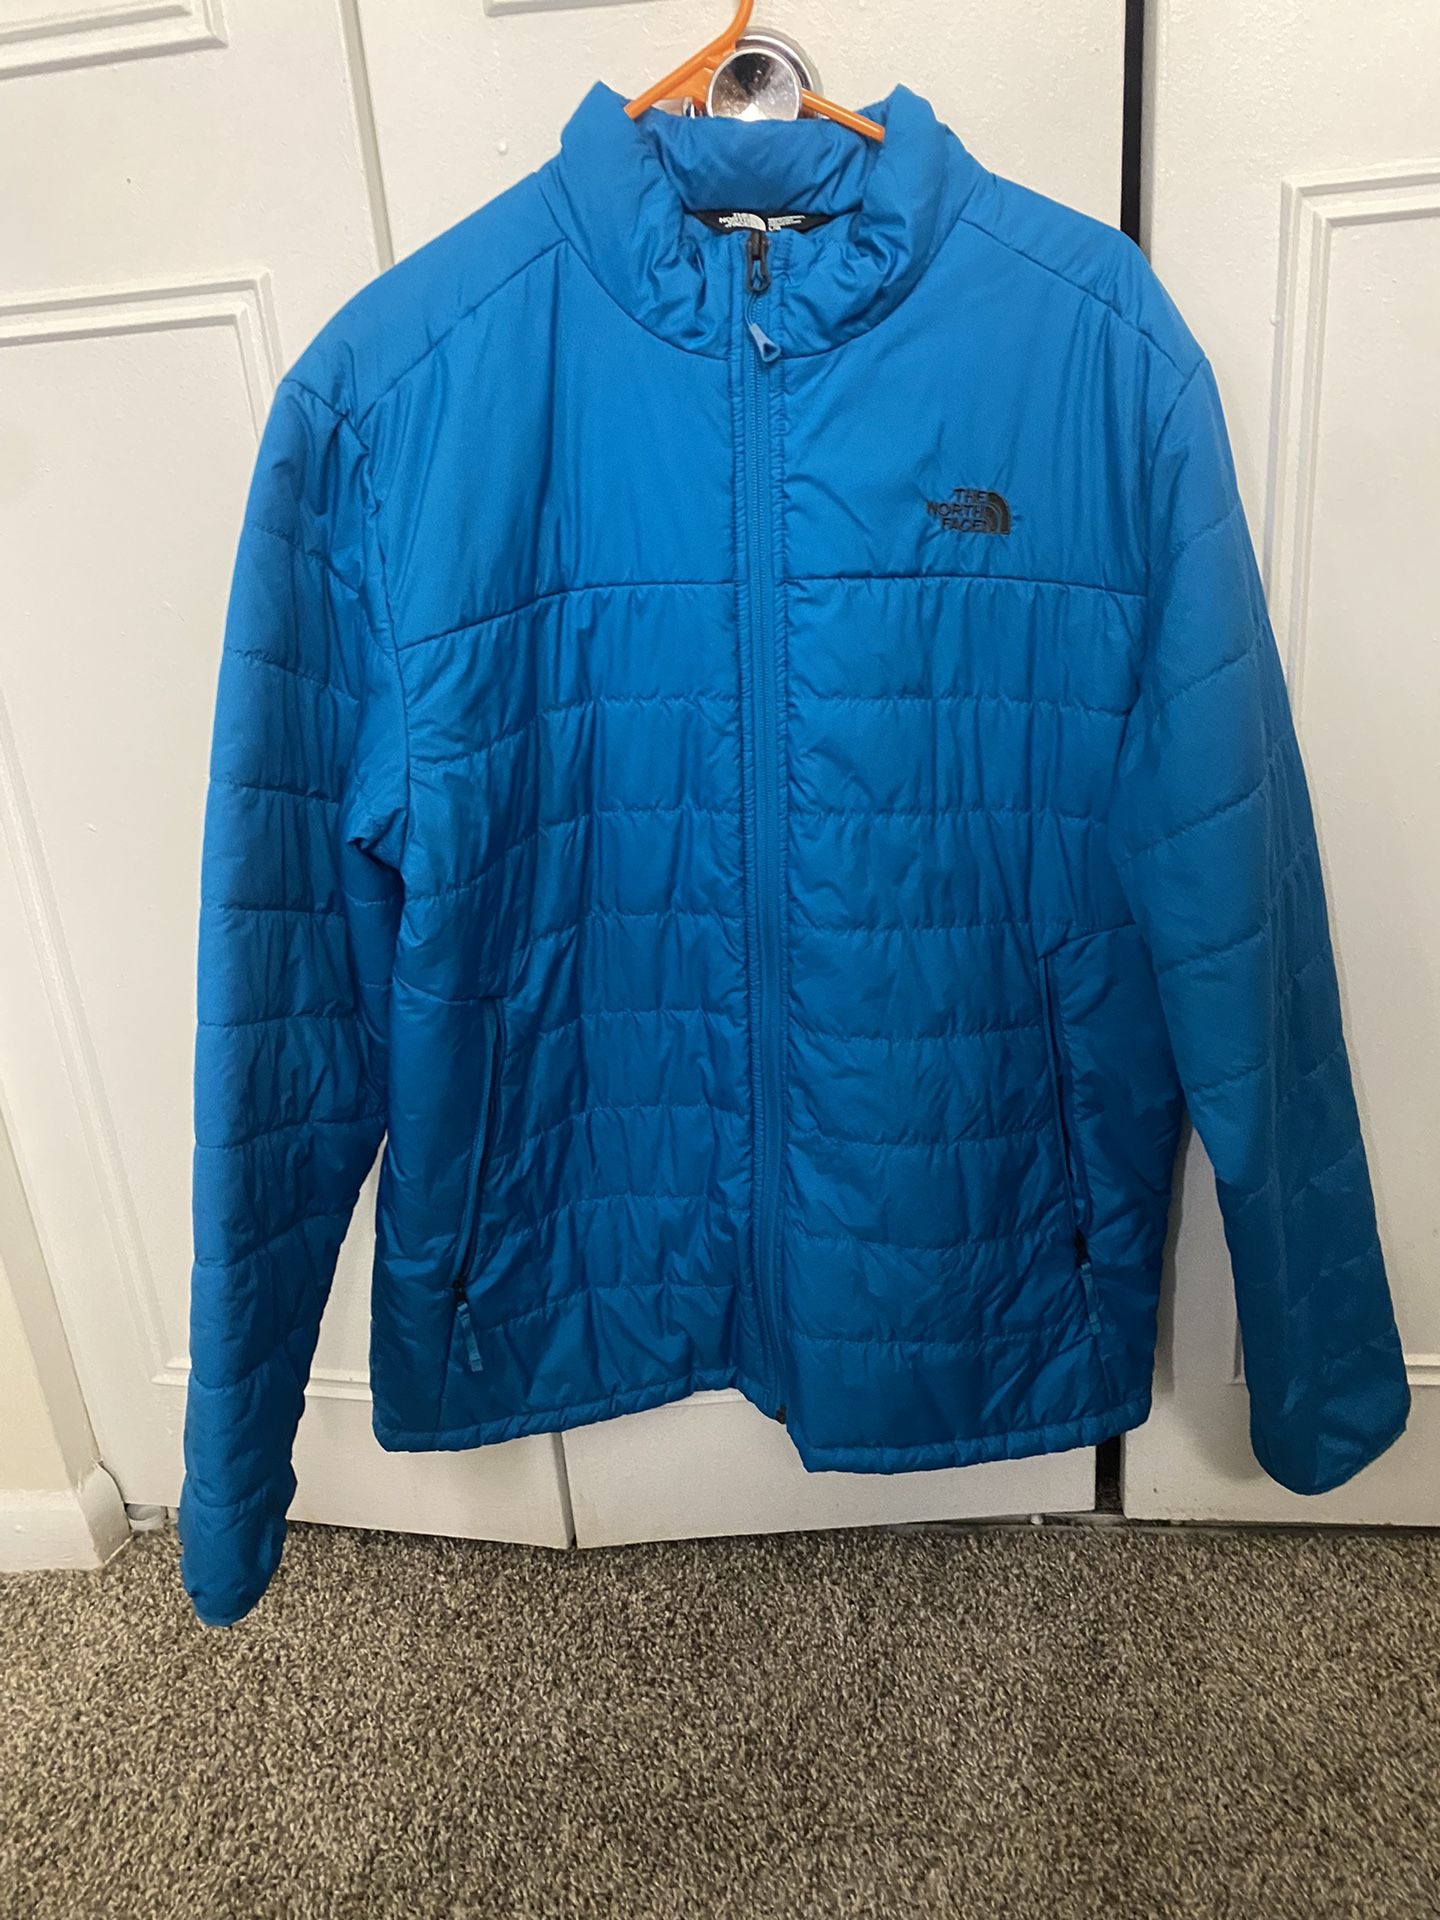 North face Blue puffer jacket